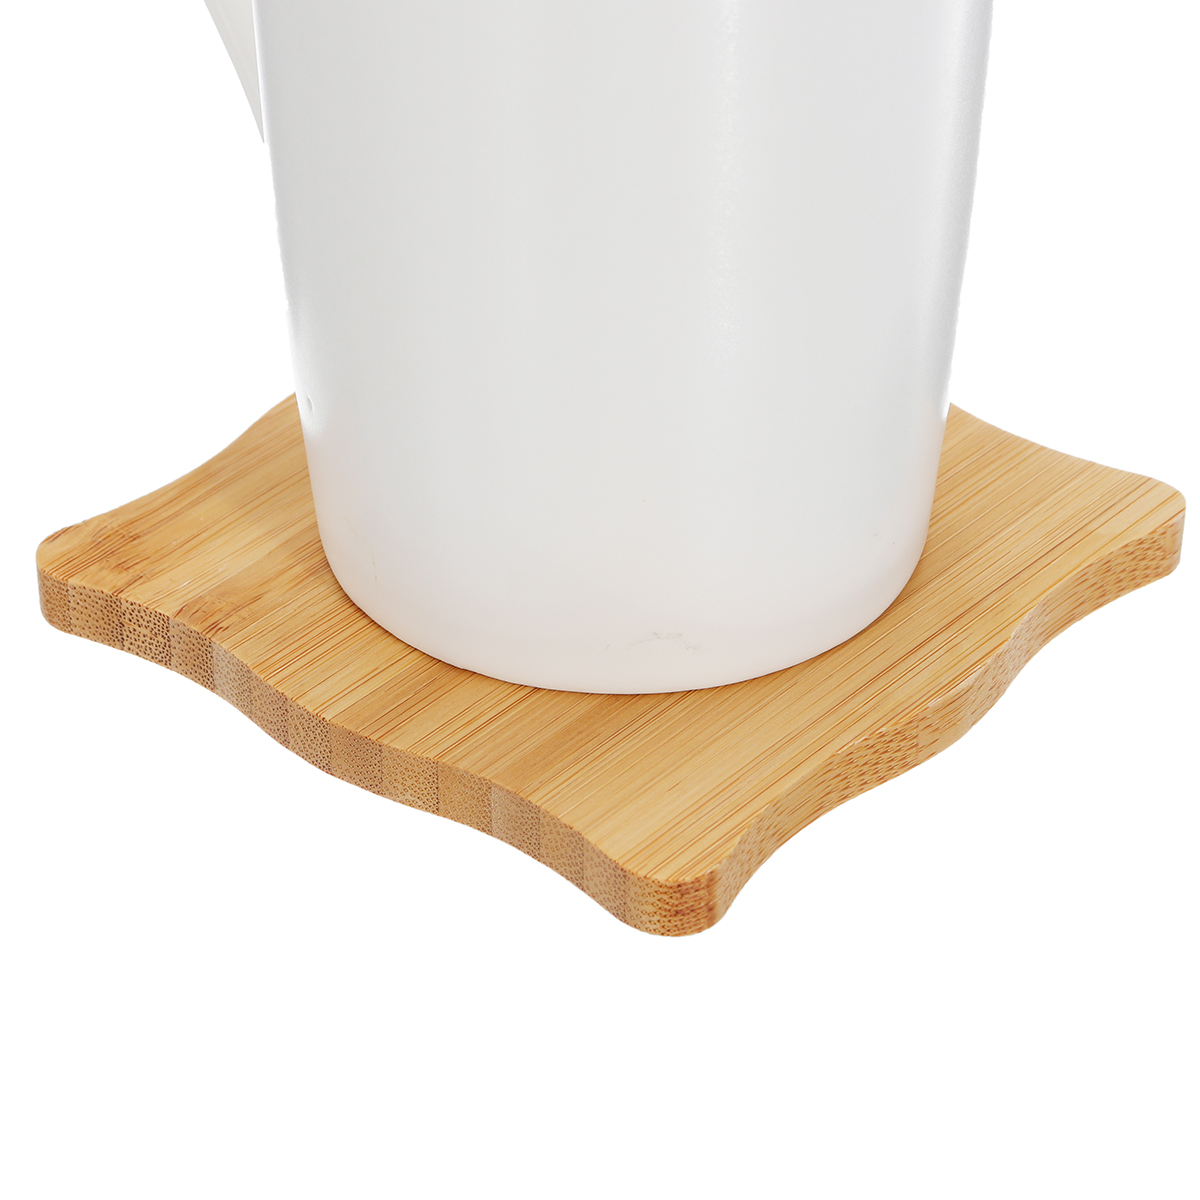 Bamboo-Cup-Mat-Water-Cup-Storage-Rack-Creative-Cup-Organizing-Shelf-Household-Office-Living-Wooden-G-1756070-12